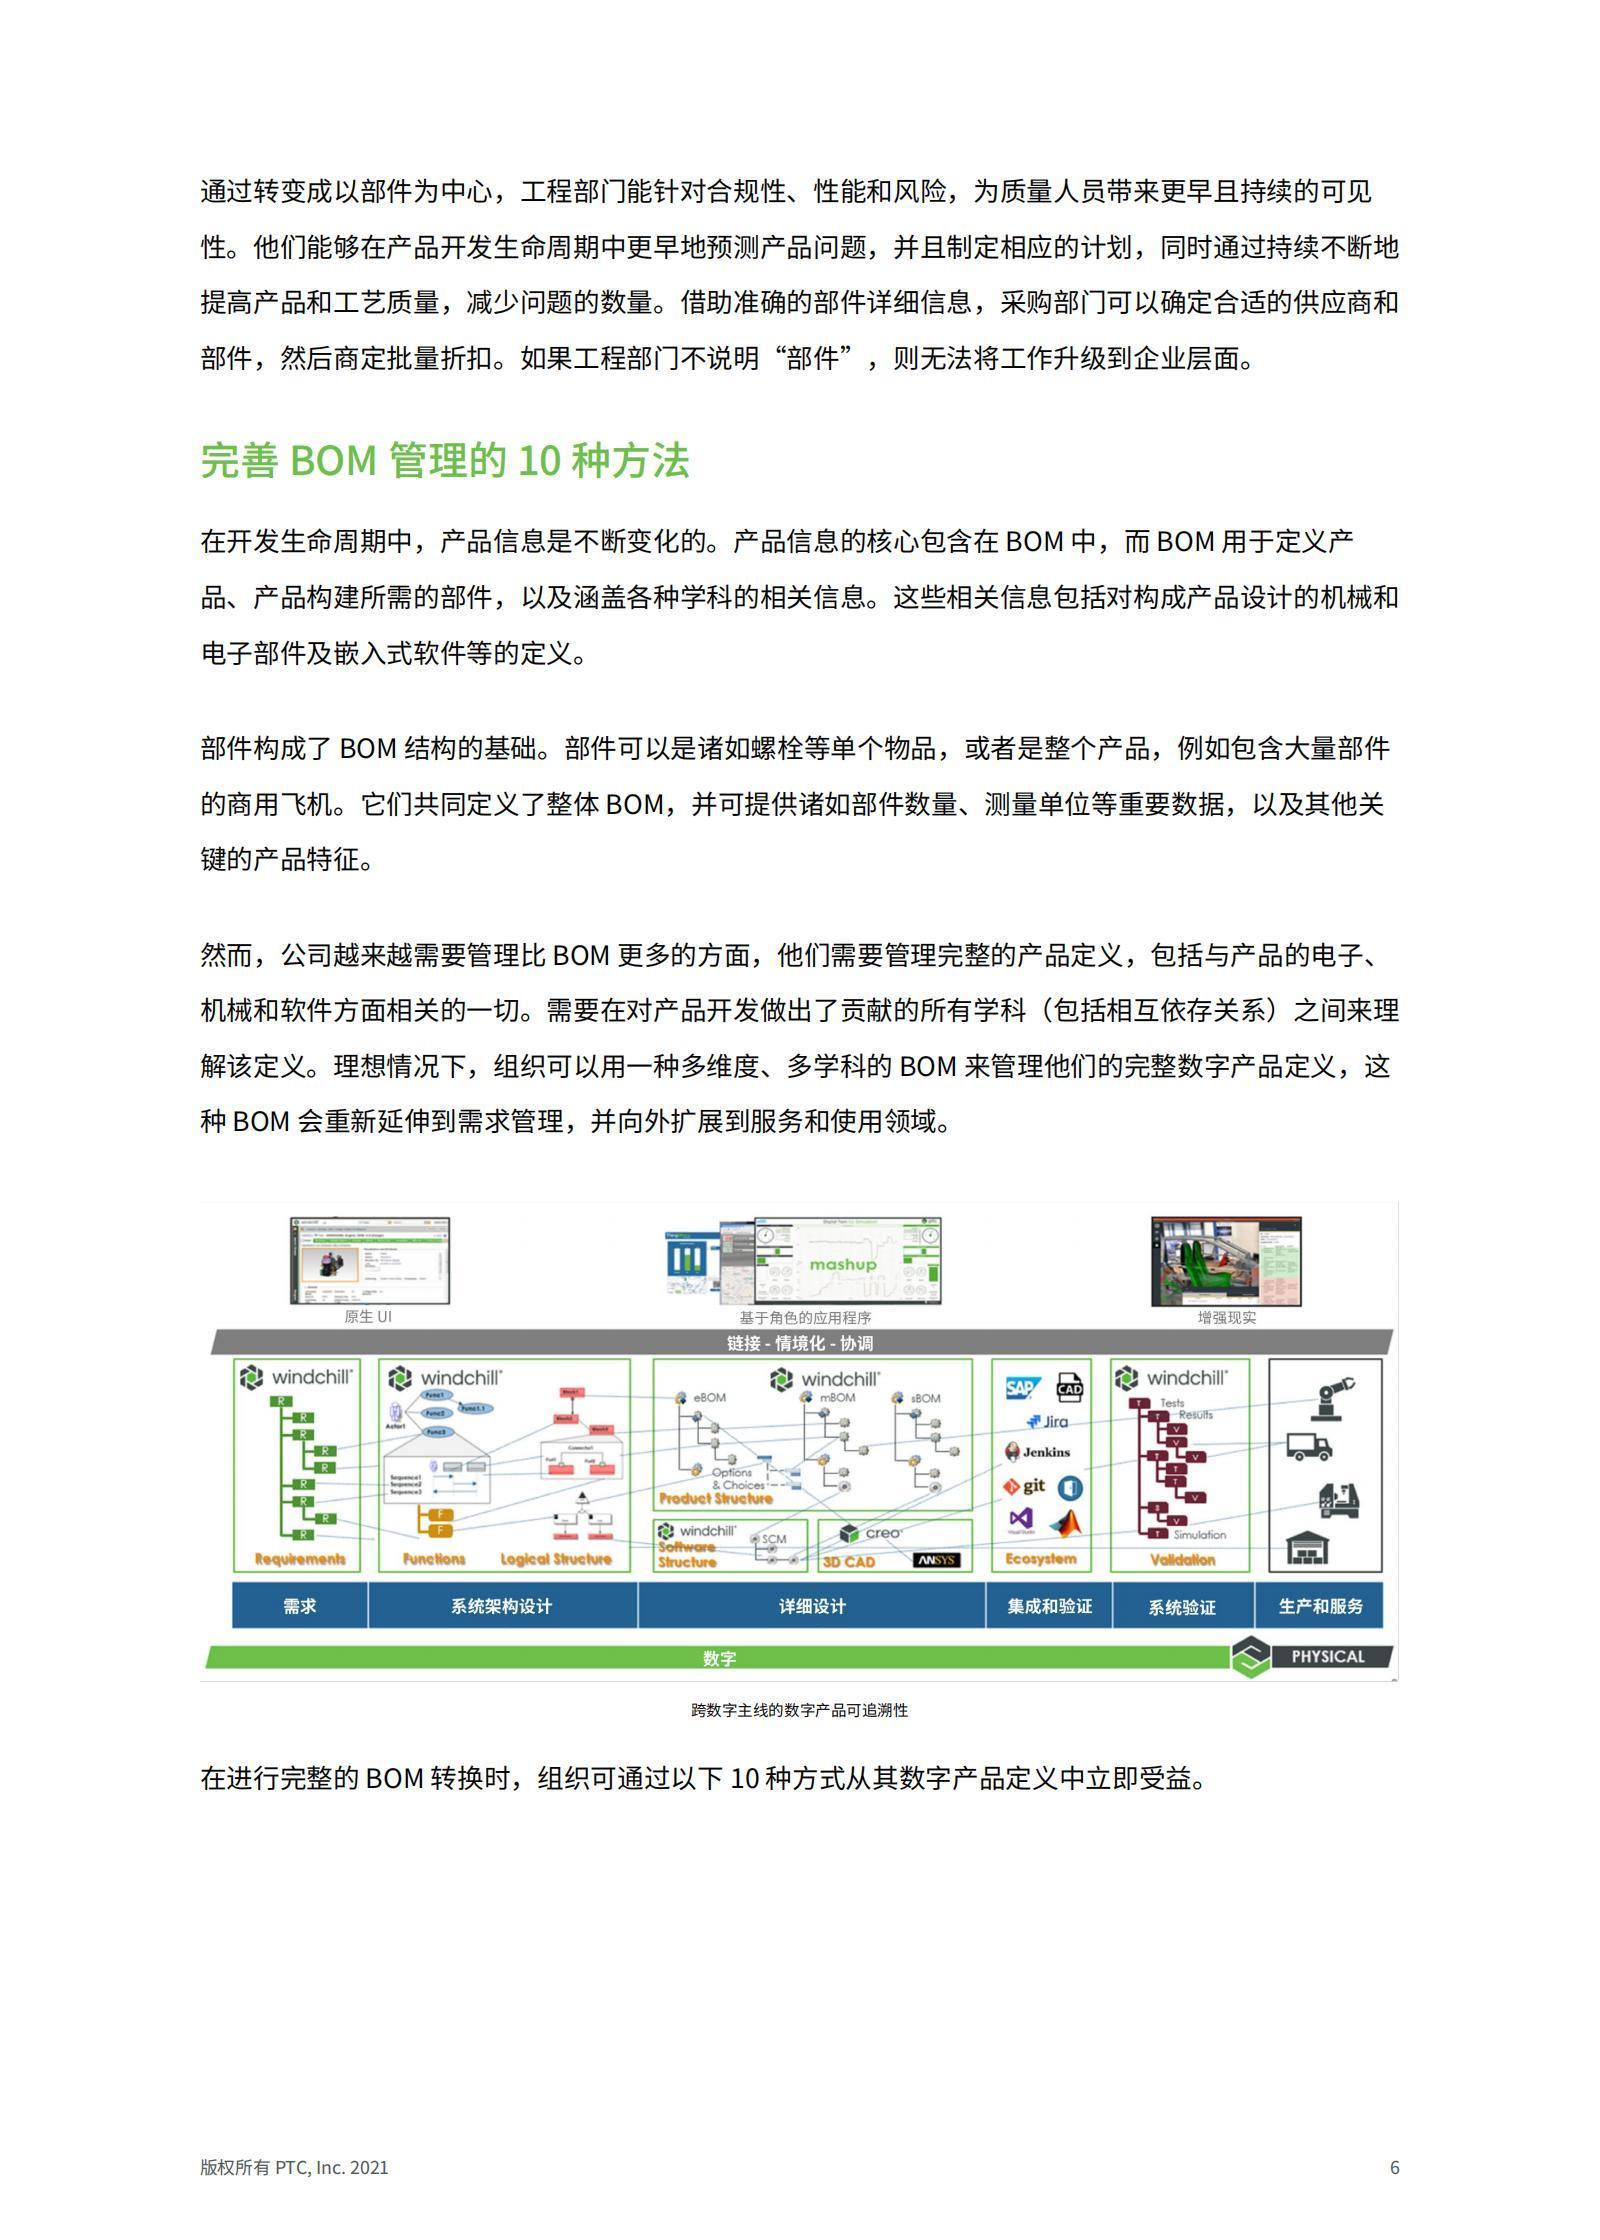 Whitepaper_ Establish a BOM Centric Approach_ Ten Ways to Organize Your Data (Chinese)_05